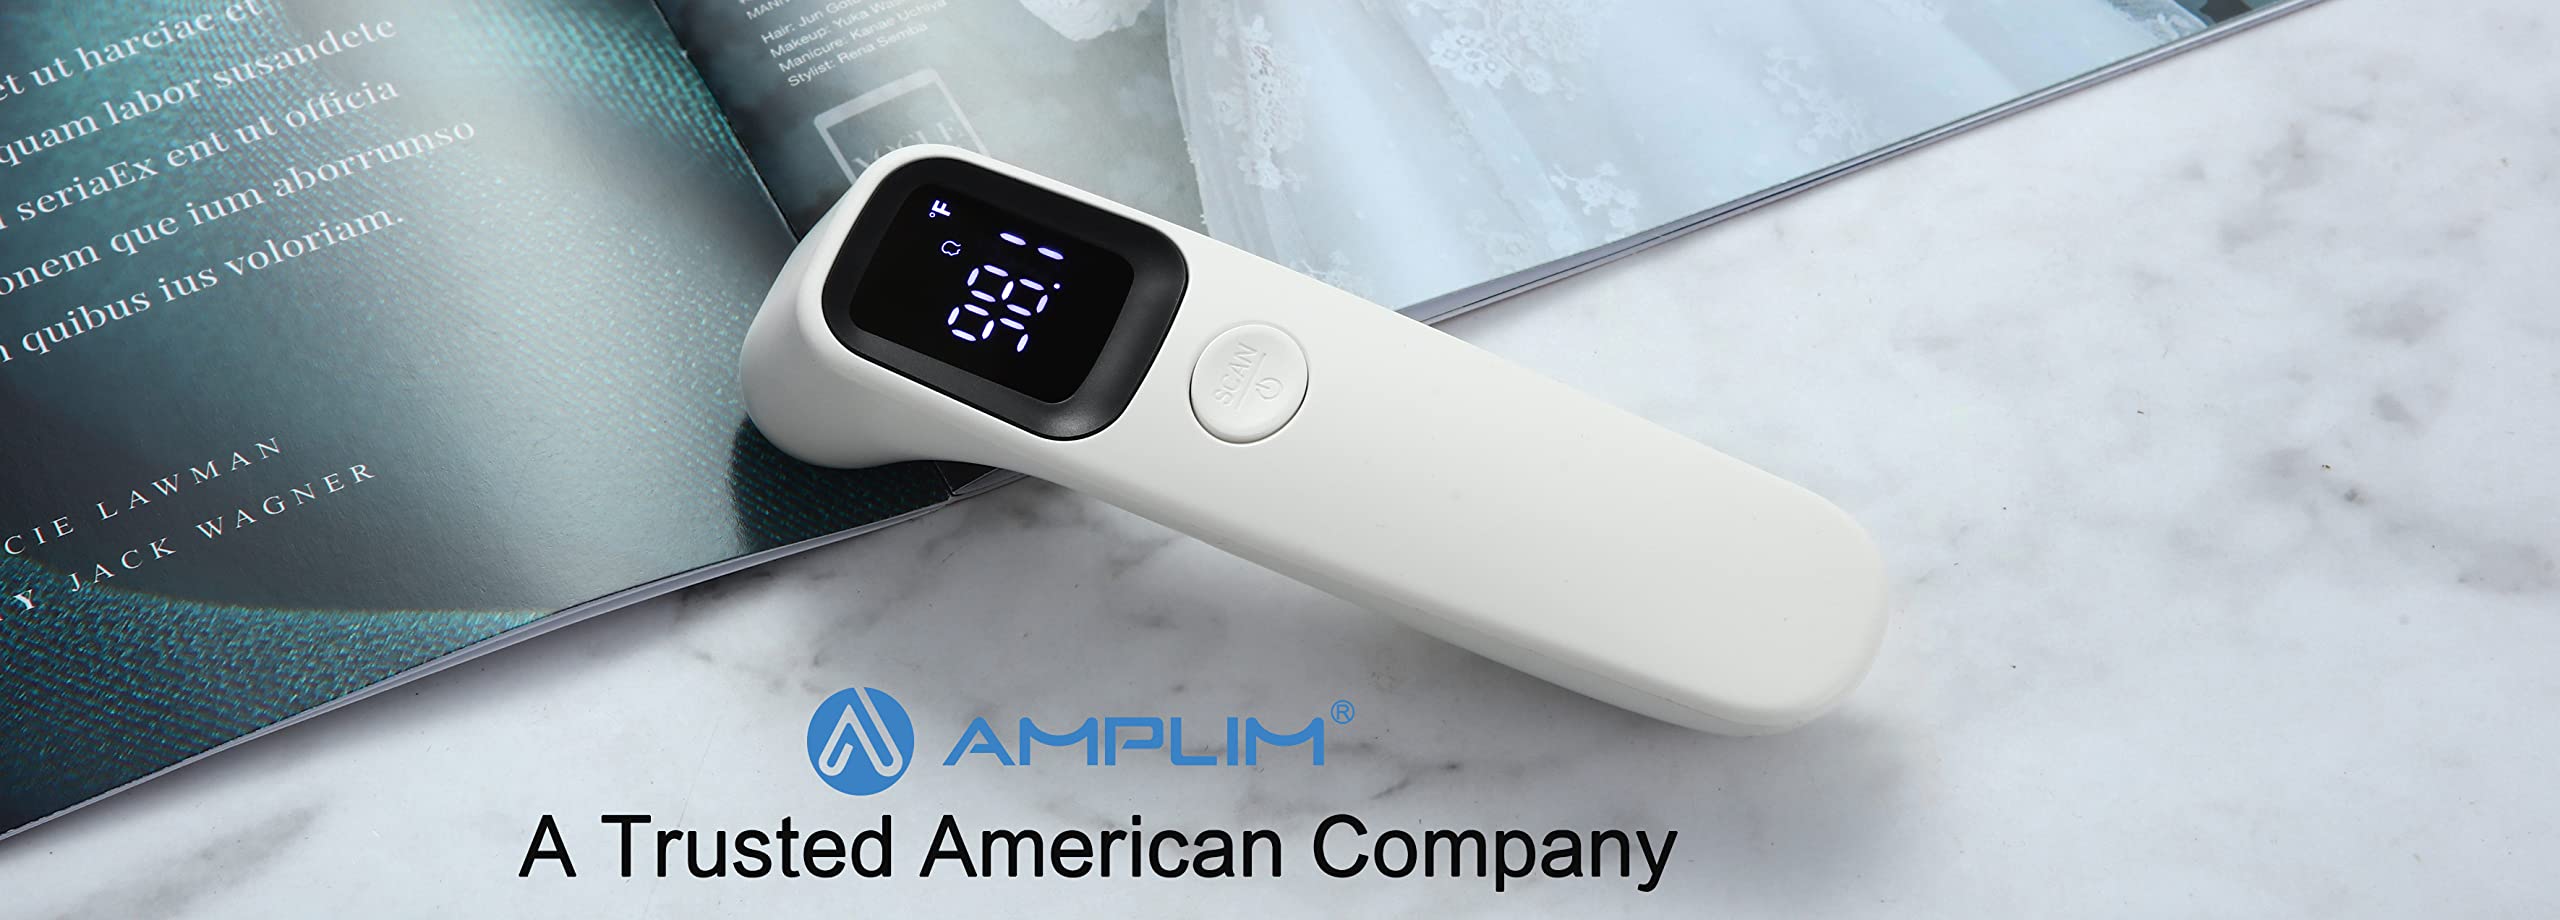 Amplim Non Contact/No Touch Forehead Thermometer for Adults, Kids, and Babies, Accurate Medical Grade Touchless Temporal Thermometer FSA HSA Approved, White